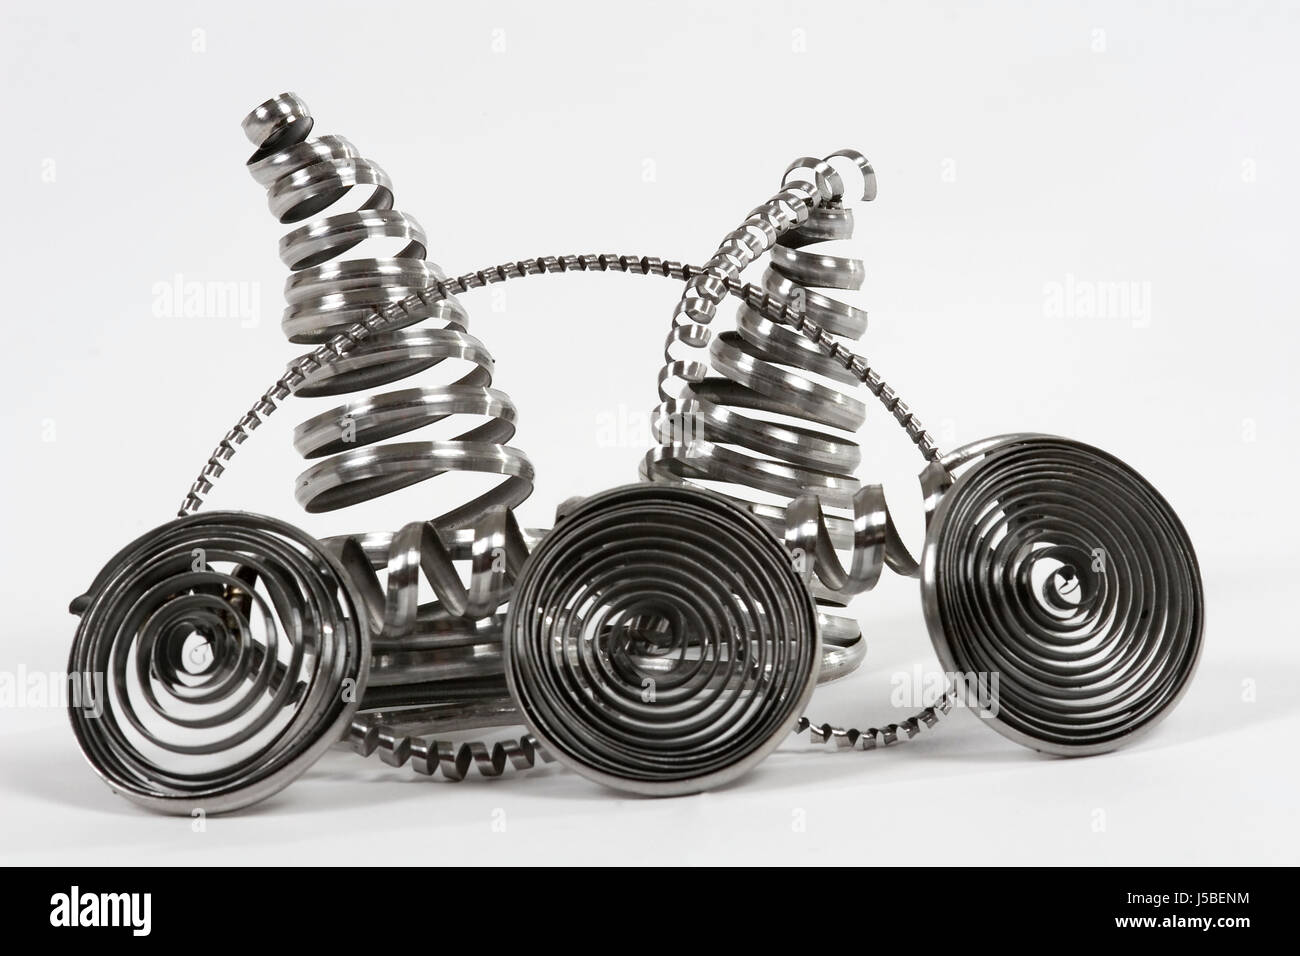 tower silver pyramid metal physiques spiral gobbled wire twisted abstract Stock Photo